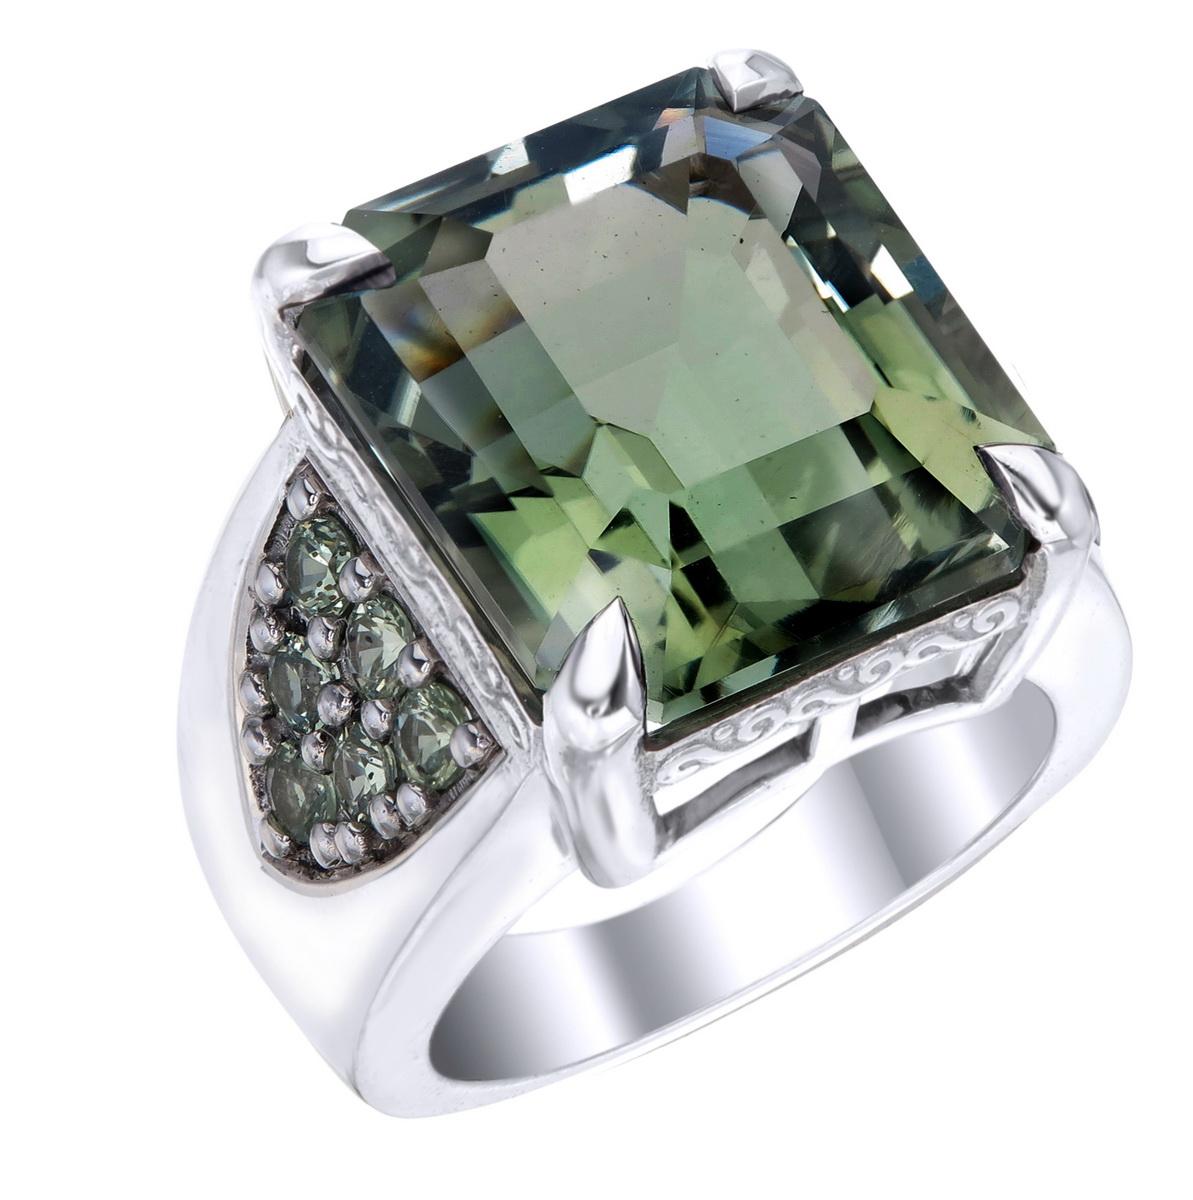 Orloff of Denmark; 17.06 carat Green Amethyst Sterling Silver Ring set with twelve Fancy Green Sapphires.

This piece has been fashioned out of 925 sterling silver, and features a 17 carat green amethyst gem held by a claw setting of four sharp